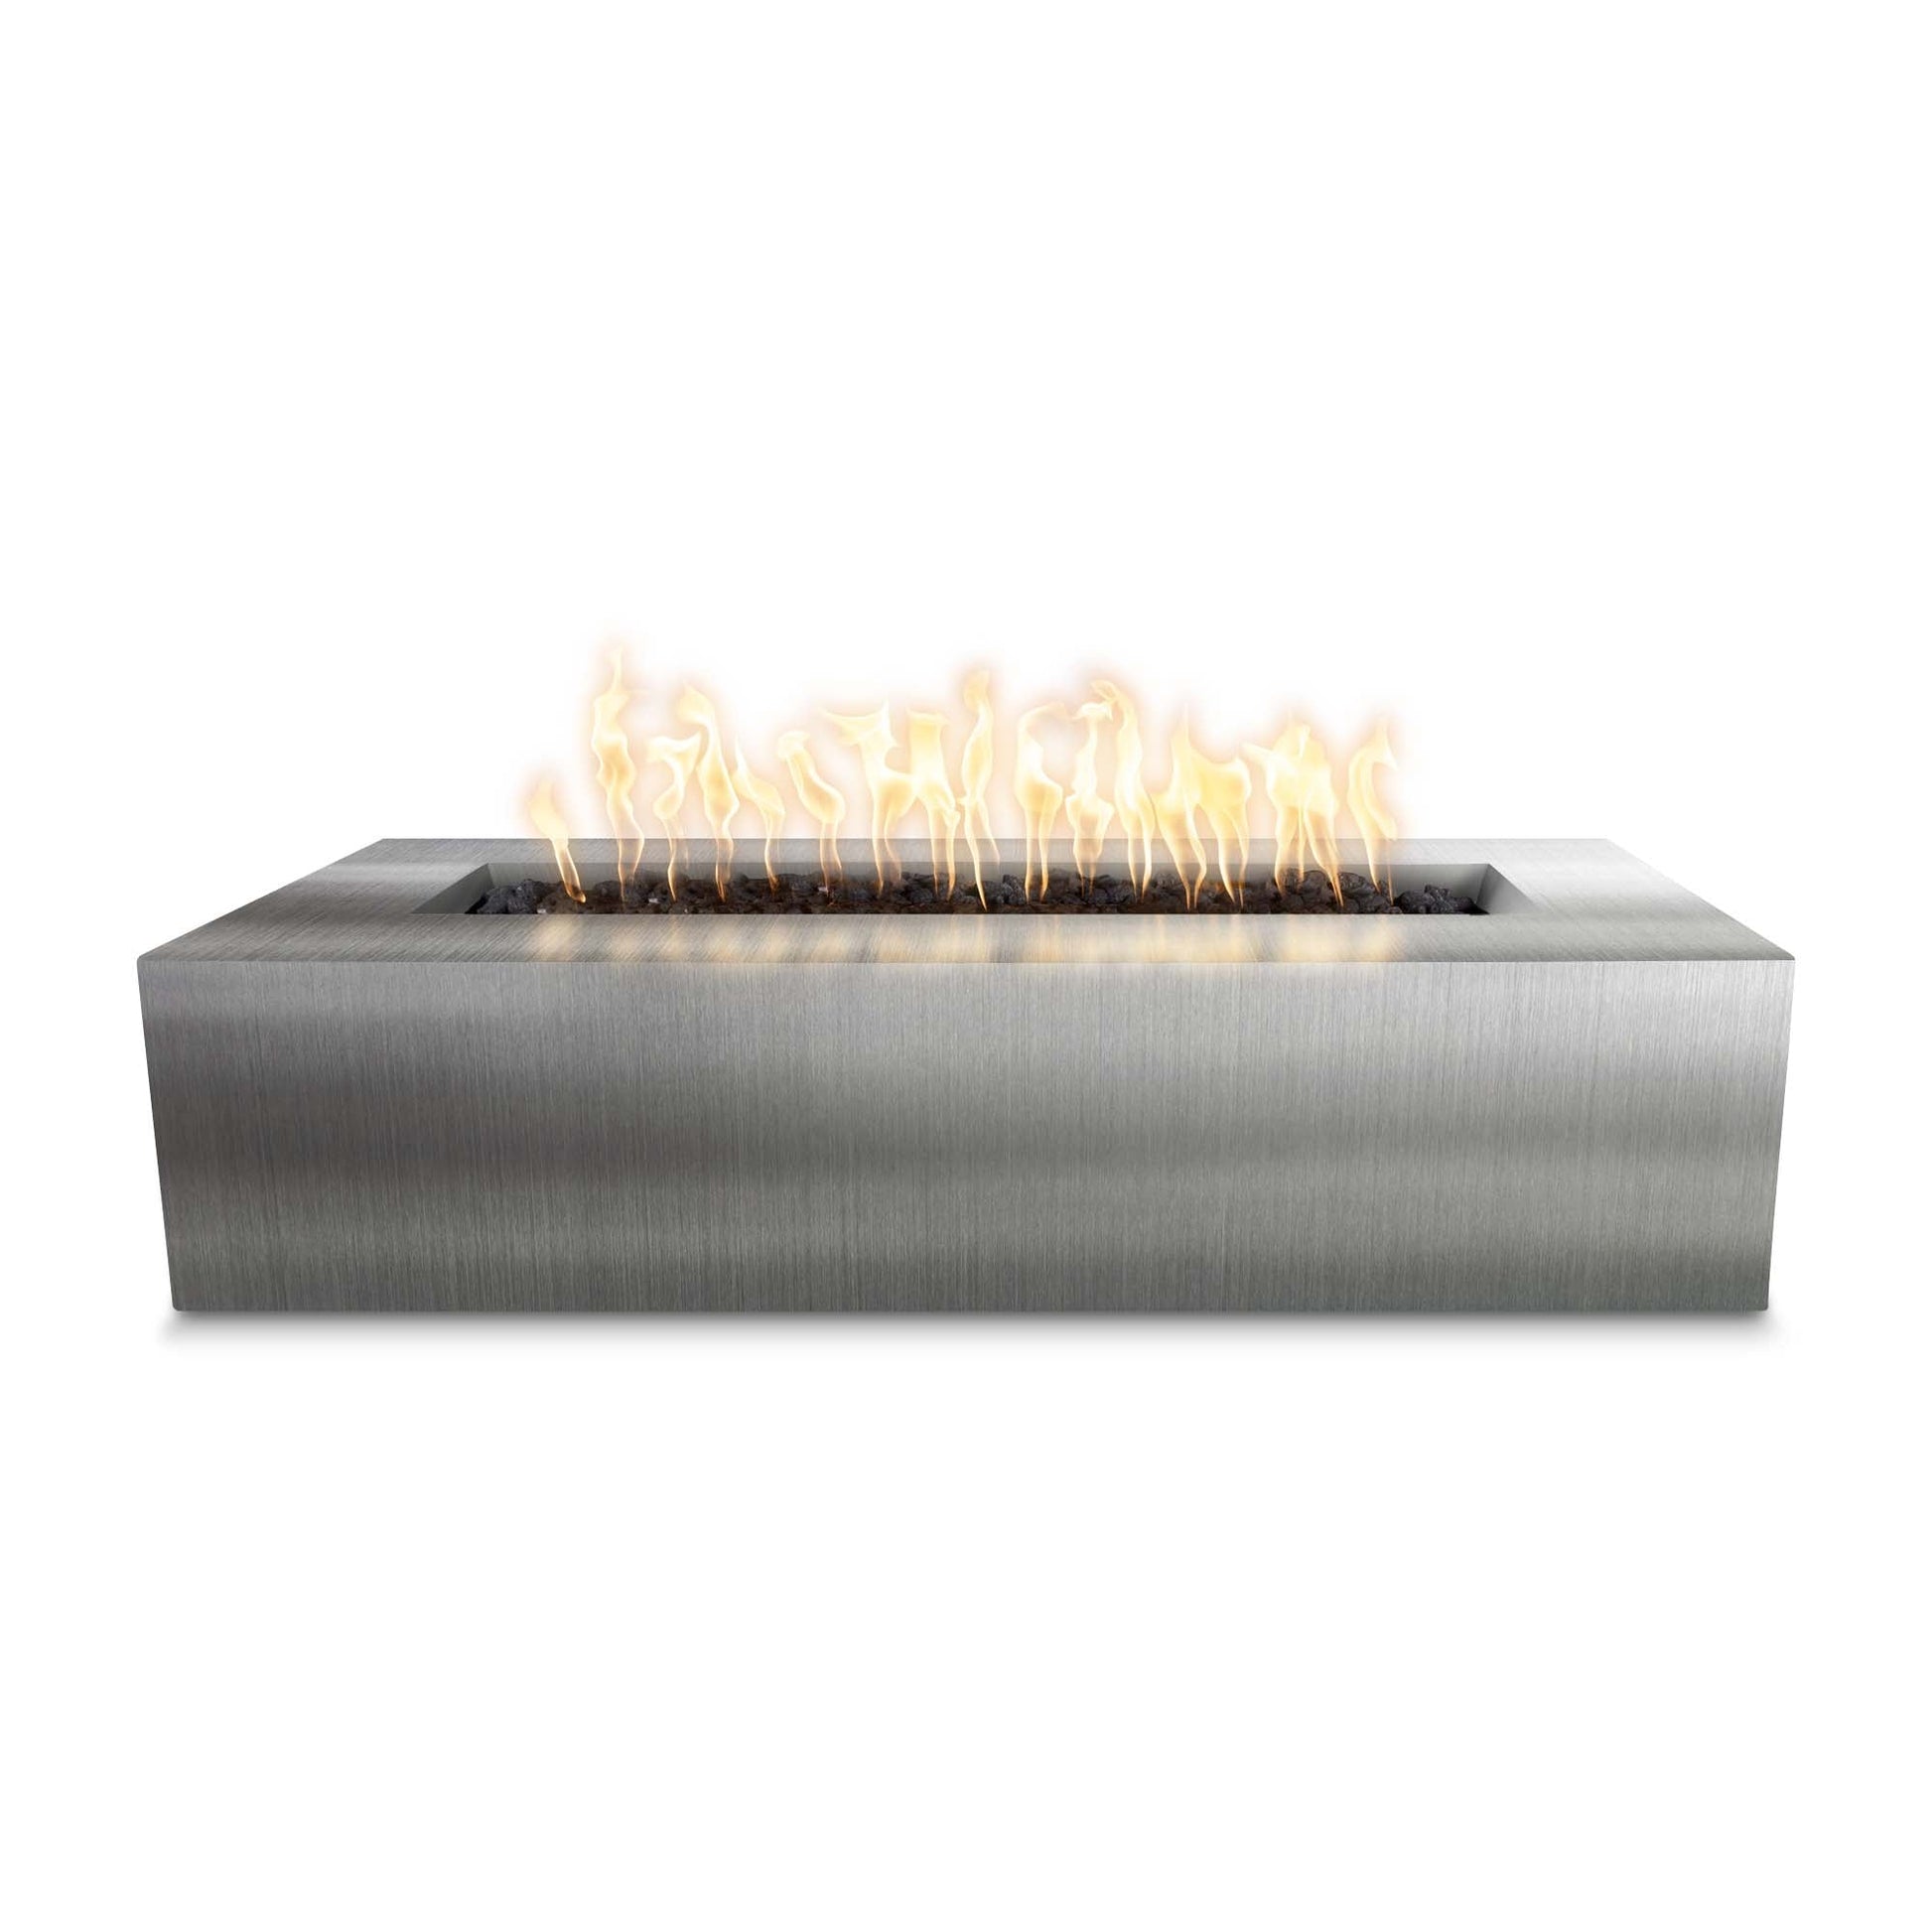 The Outdoor Plus Rectangular Regal 54" Stainless Steel Natural Gas Fire Pit with Flame Sense with Spark Ignition